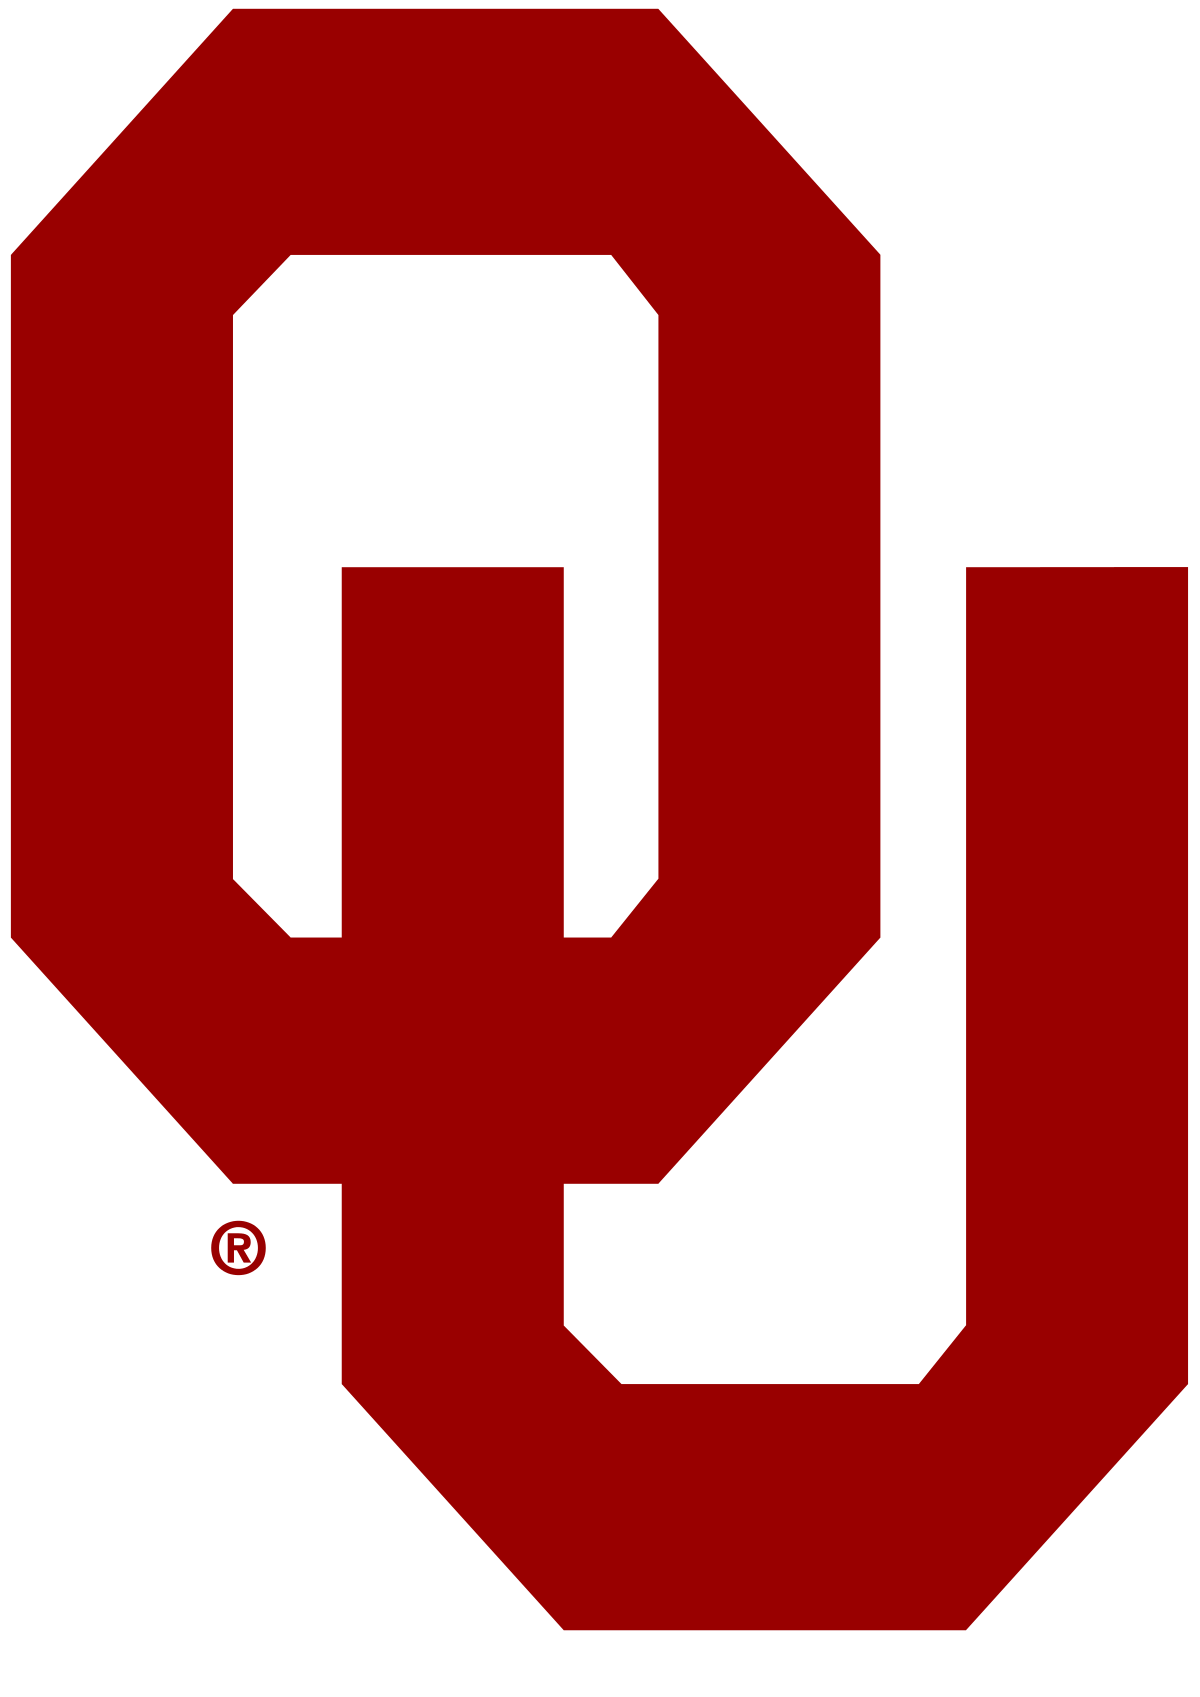 Oklahoma University is a client of Chris Zervas, an employee engagement and retention keynote speaker in Oklahoma